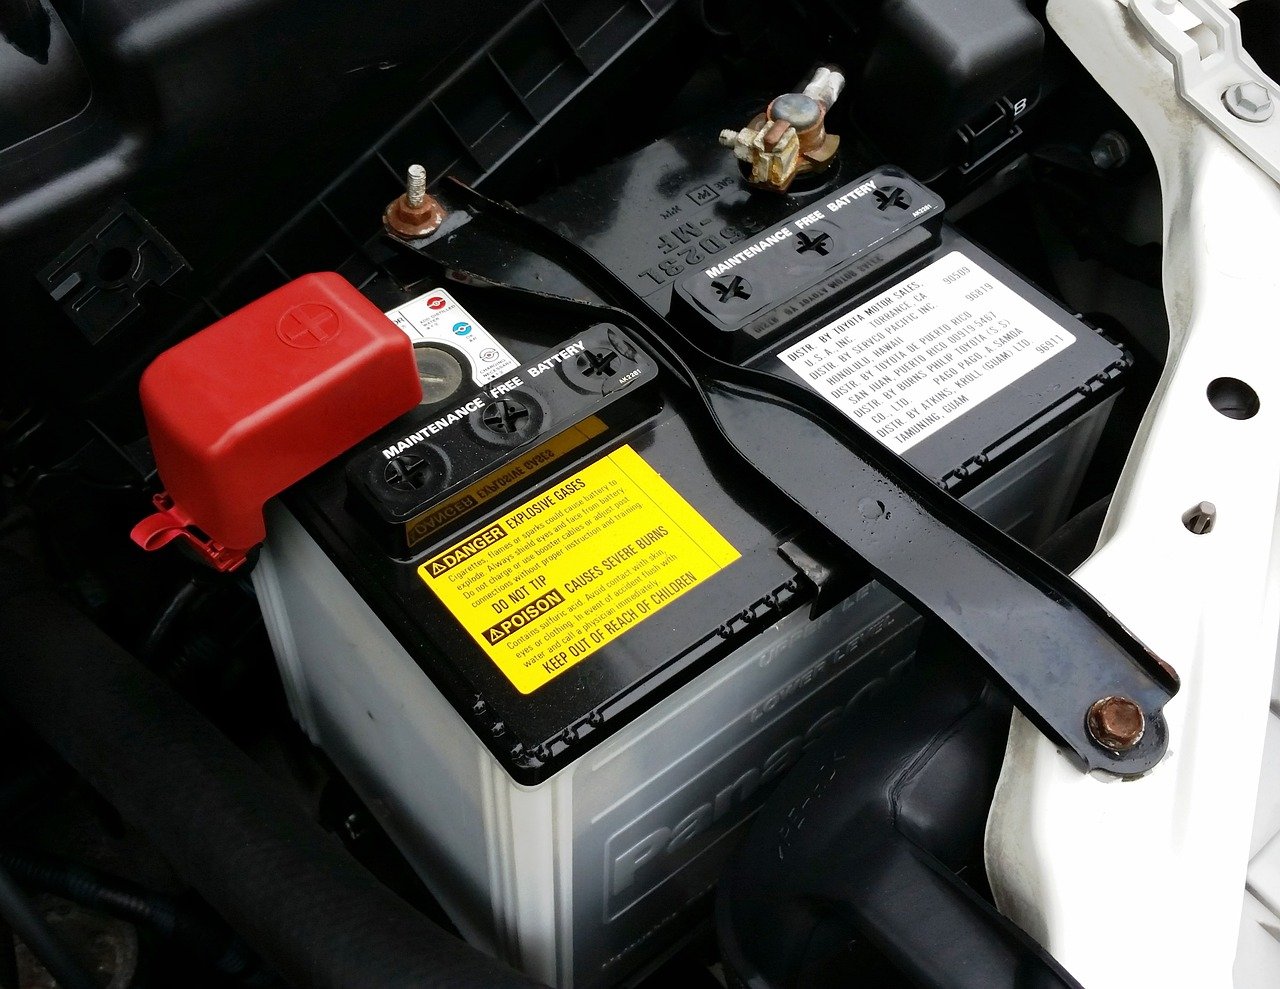 How Long Does a Car Battery Last